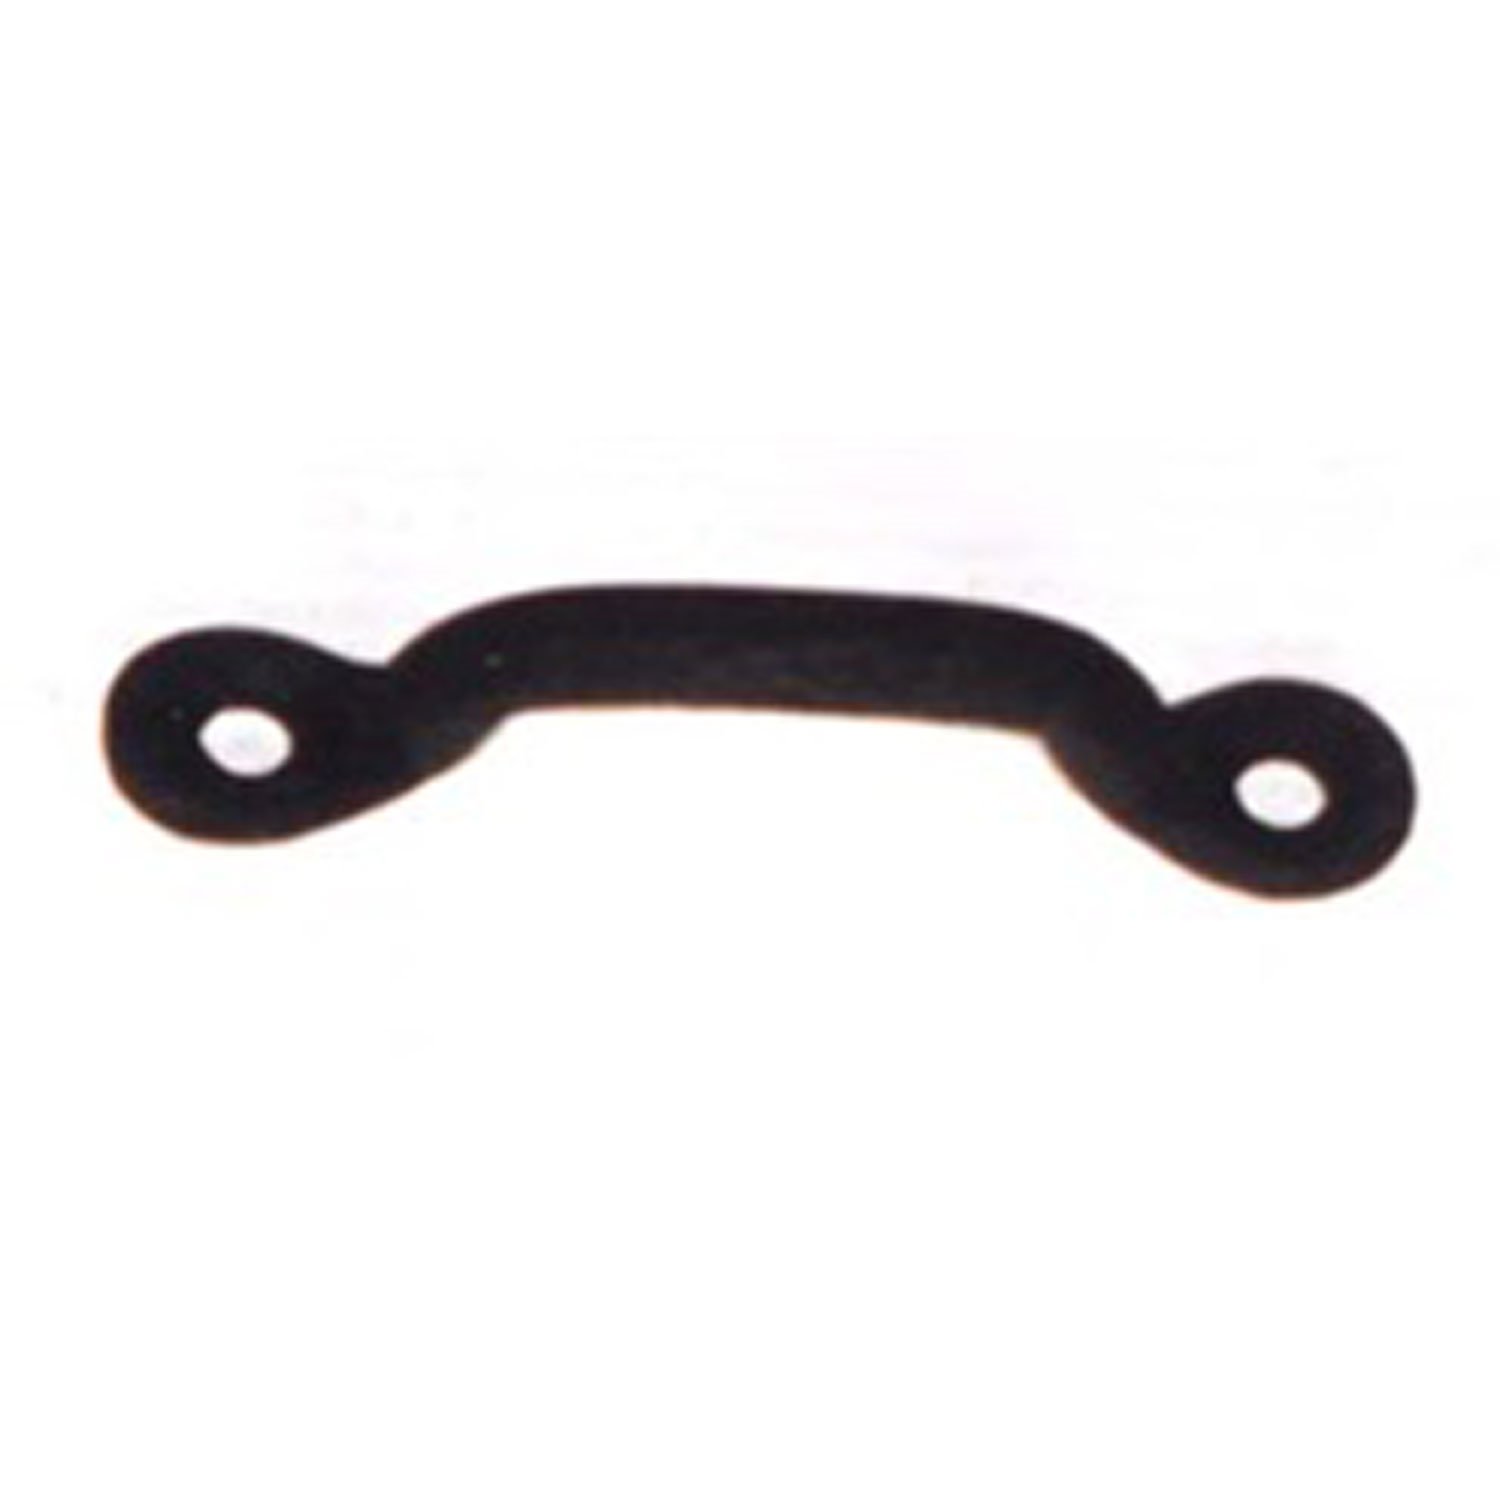 This footman loop from Omix-ADA fits 1941-1945 Willys MB and Ford GPW.